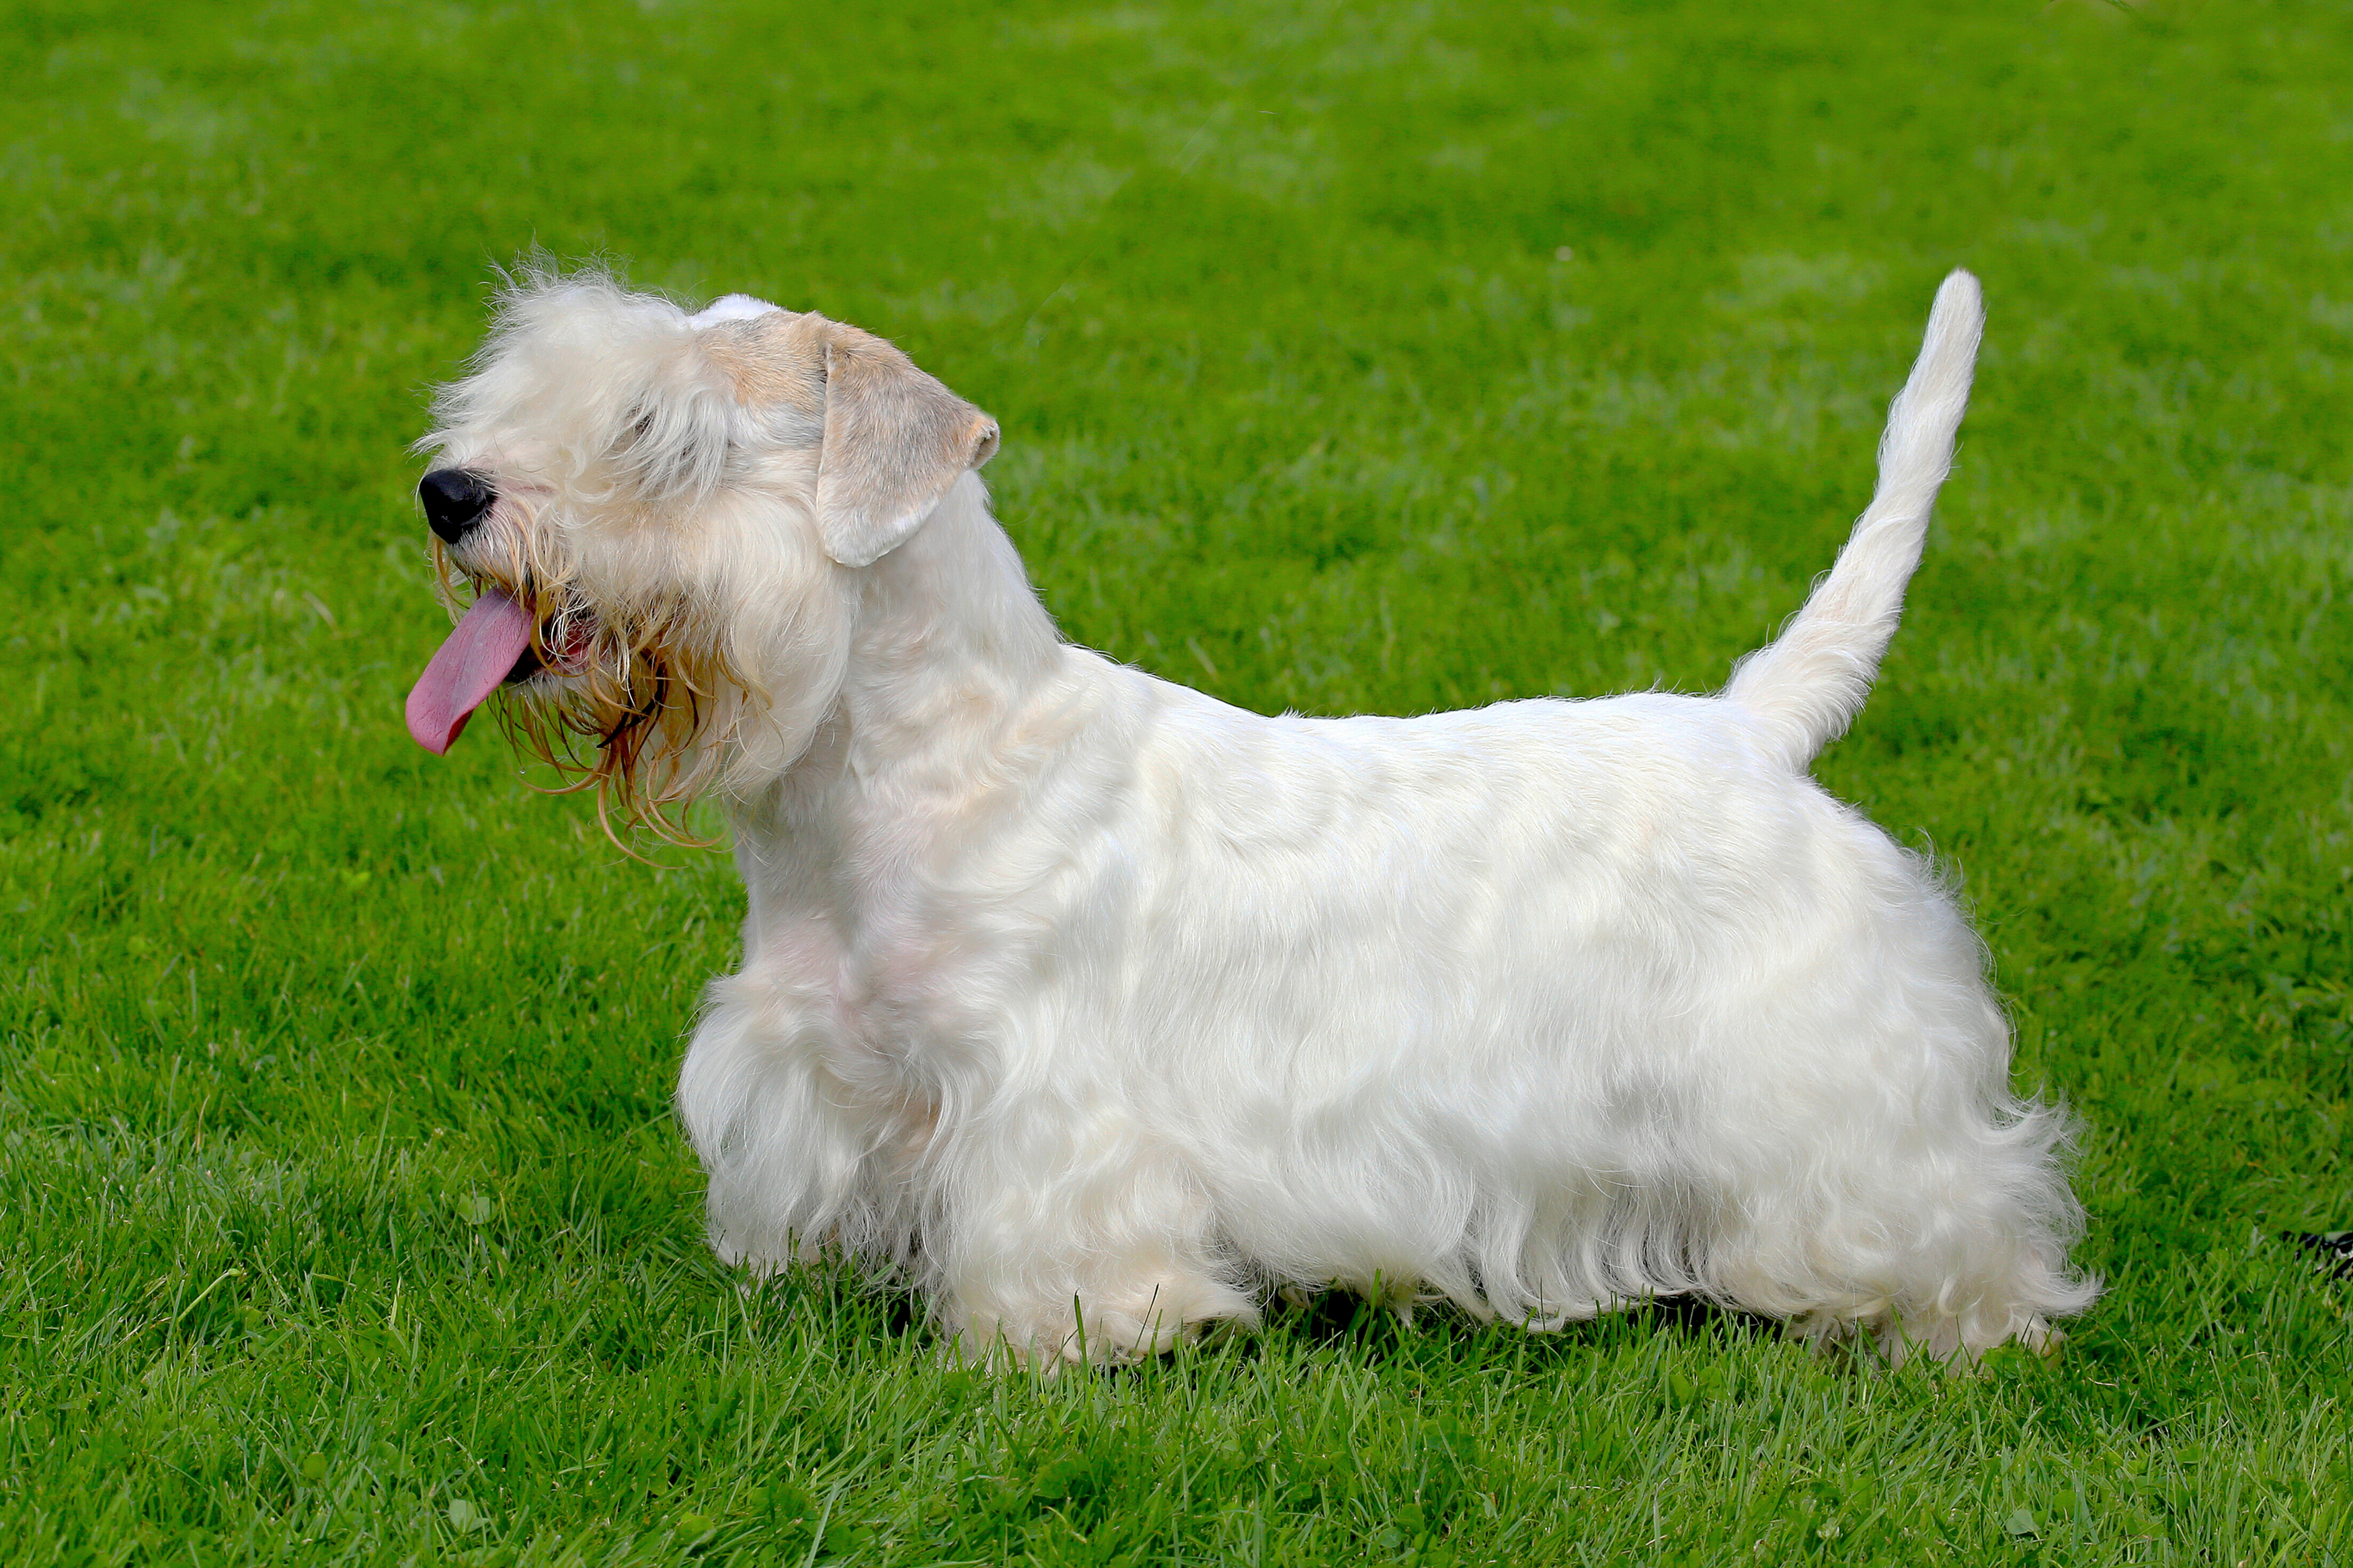 Sealyham Terrier at a Dog Show in the Current Year